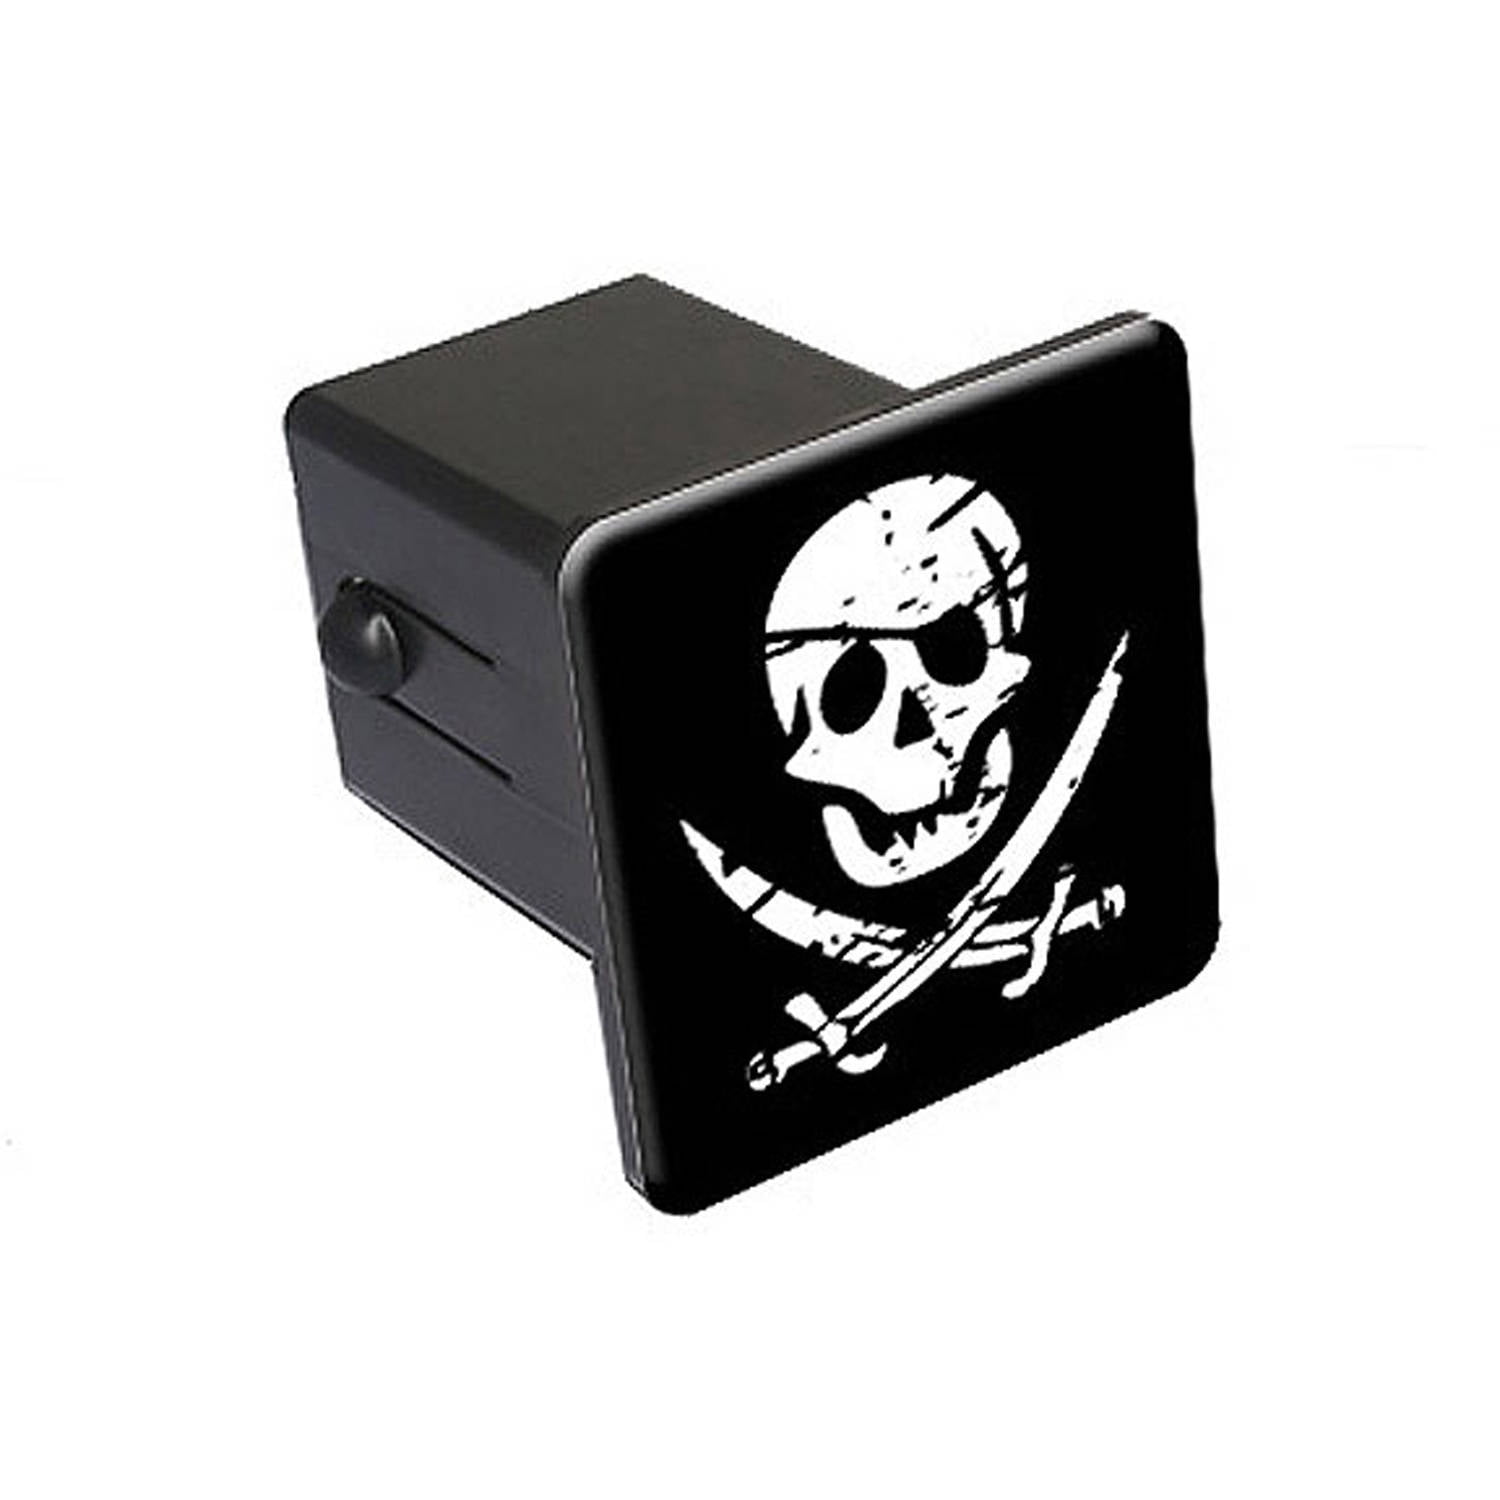 Graphics and More Misfits Fiend Skull Logo Tow Trailer Hitch Cover Plug Insert 